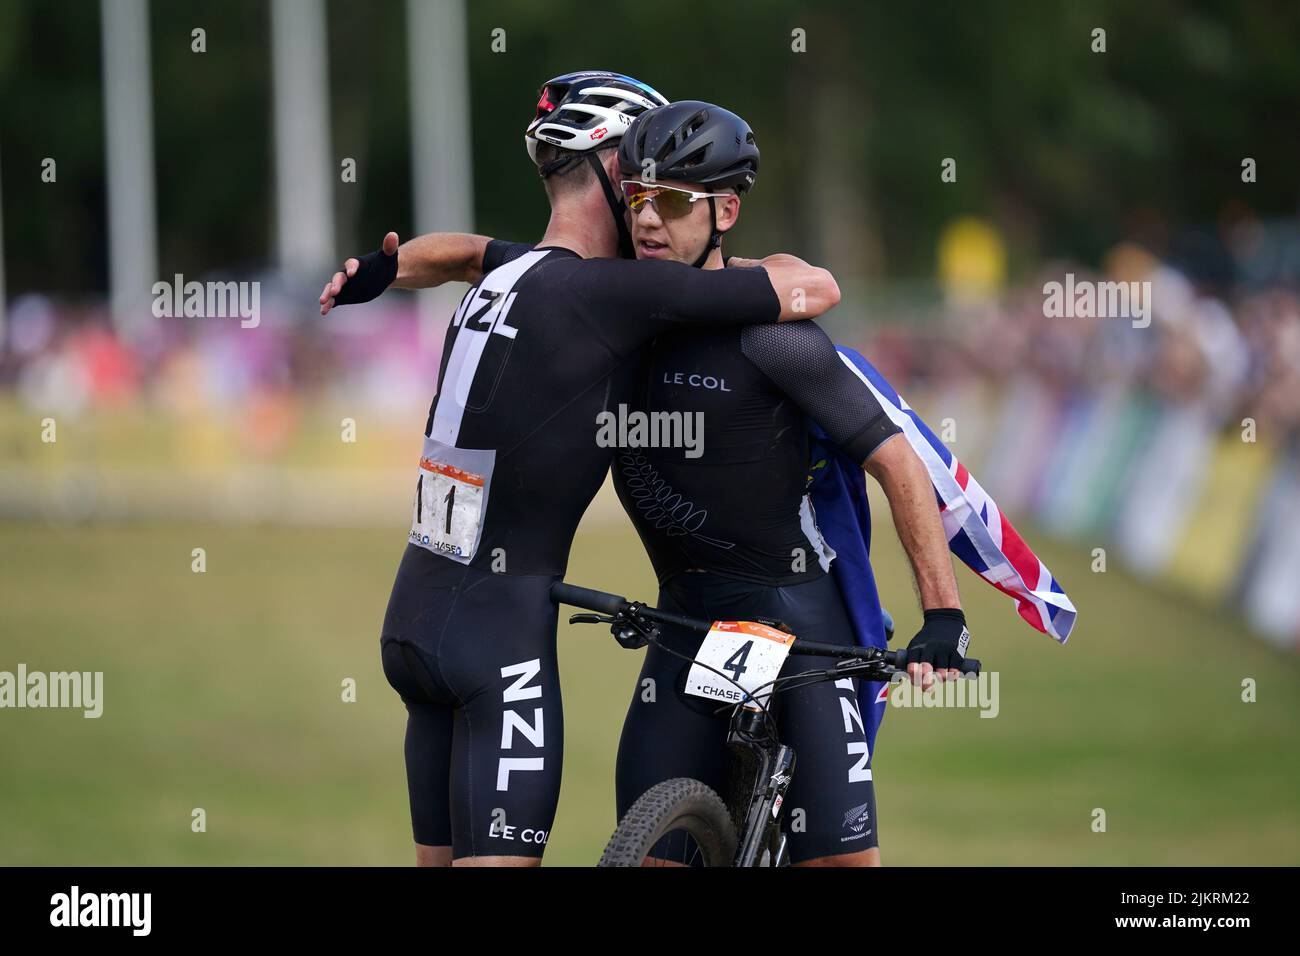 New Zealand's Samuel Gaze (left) wins gold and Ben Oliver takes silver in Men's Cross-country final at Cannock Chase on day six of the 2022 Commonwealth Games. Picture date: Wednesday August 3, 2022. Stock Photo